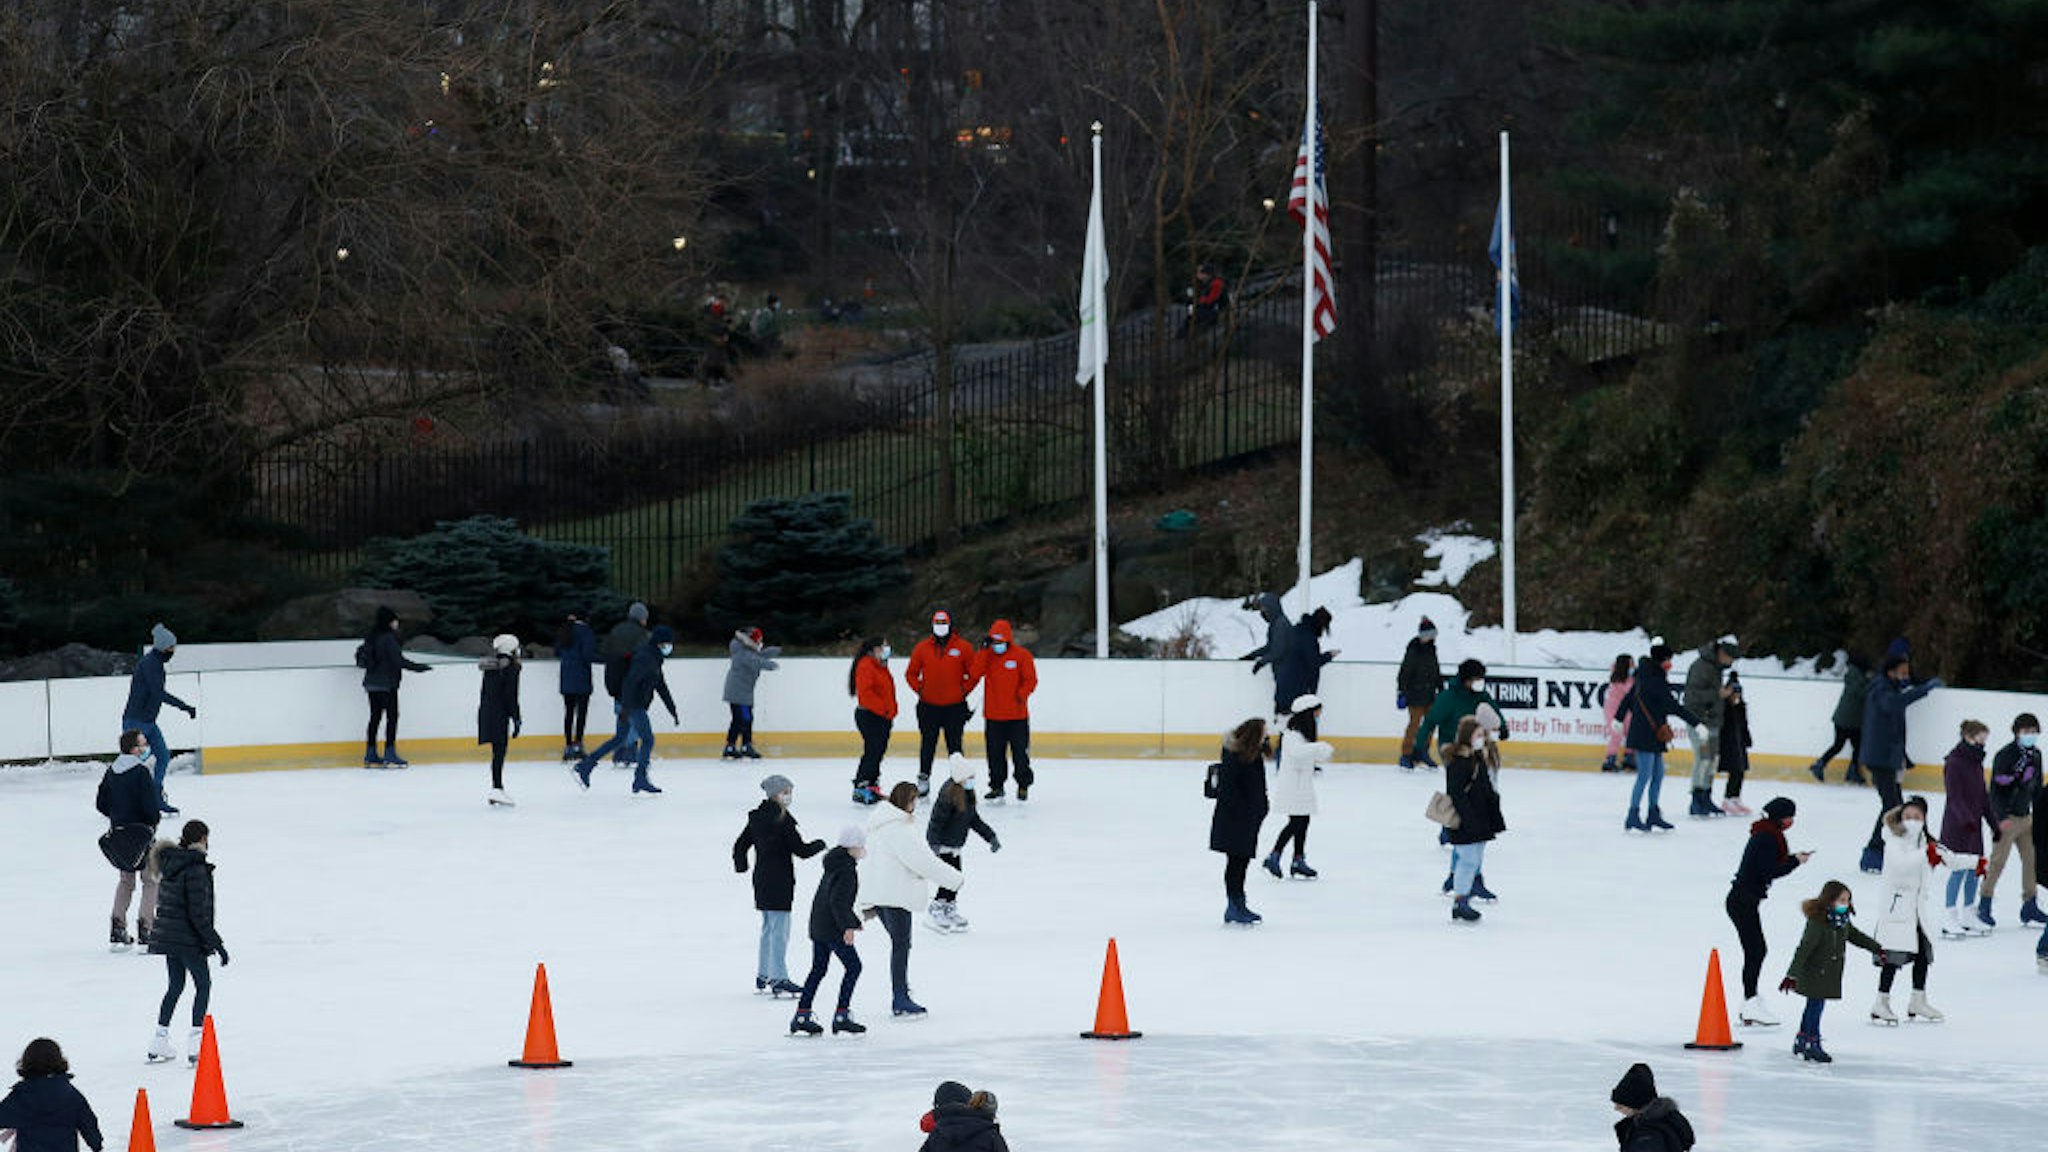 People skate at Wollman Rink in Central Park on December 27, 2020 in New York City.